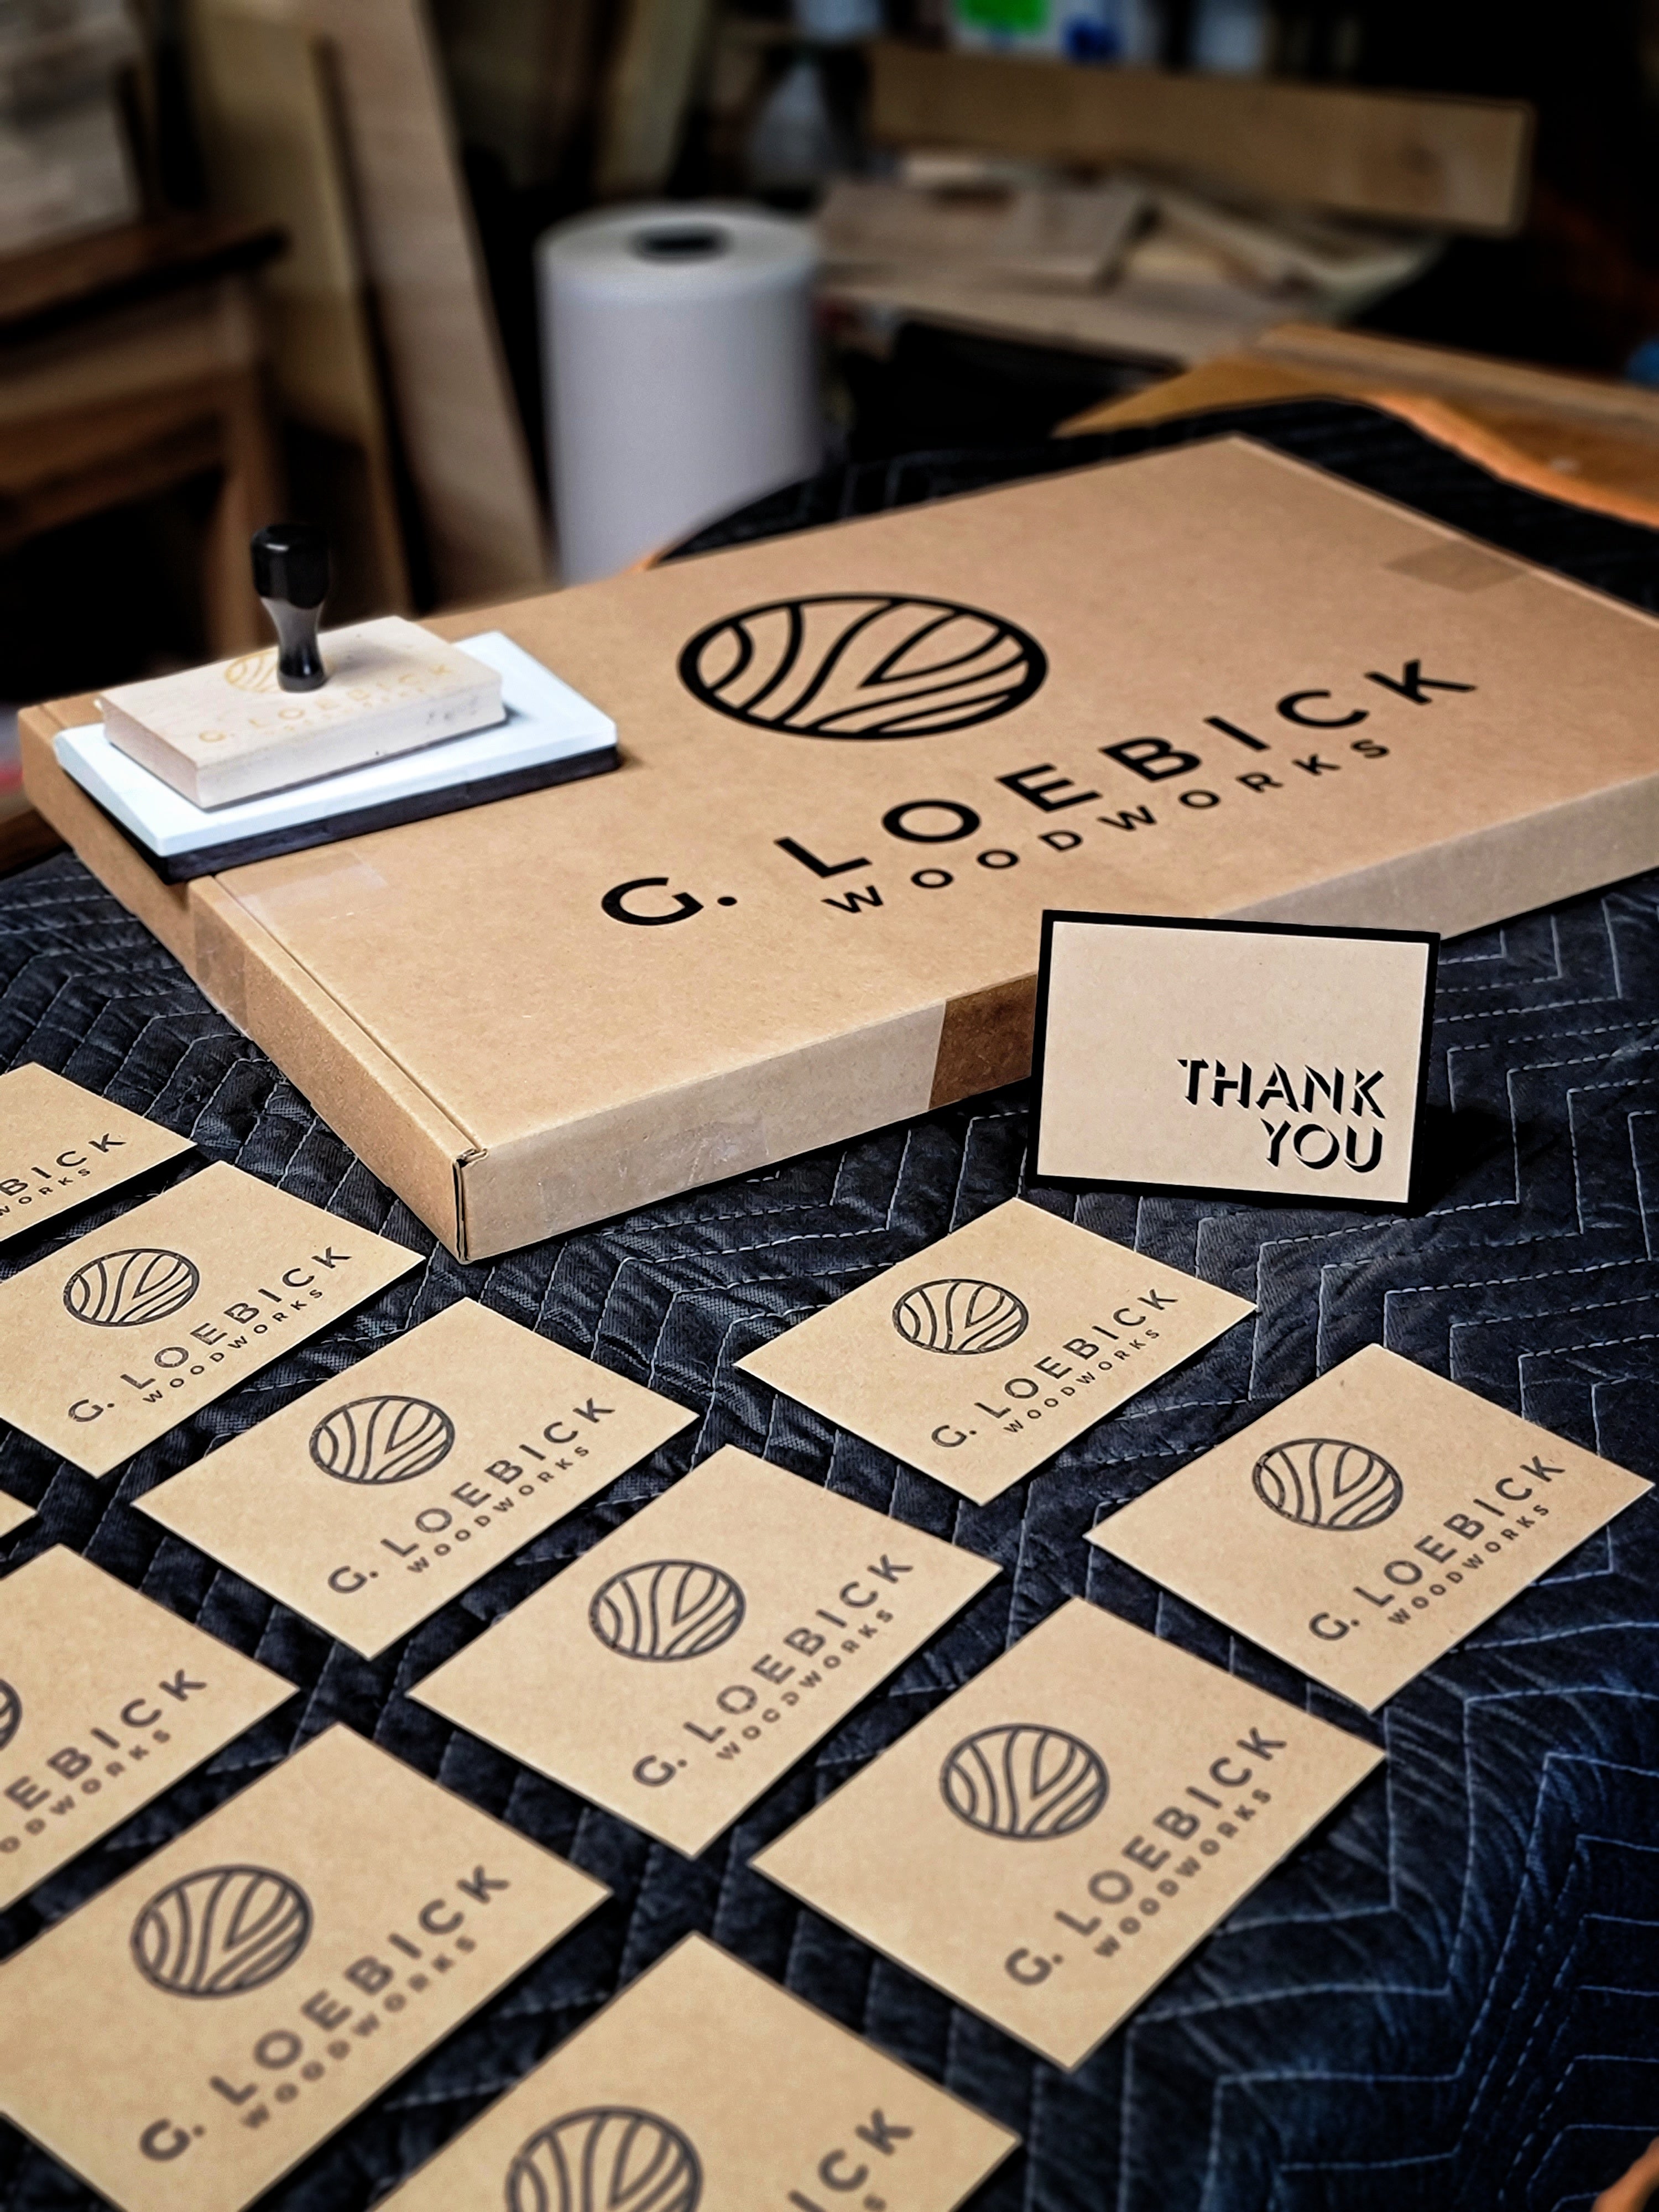 Custom mailer box and thank you cards from G. Loebick Woodworks. 